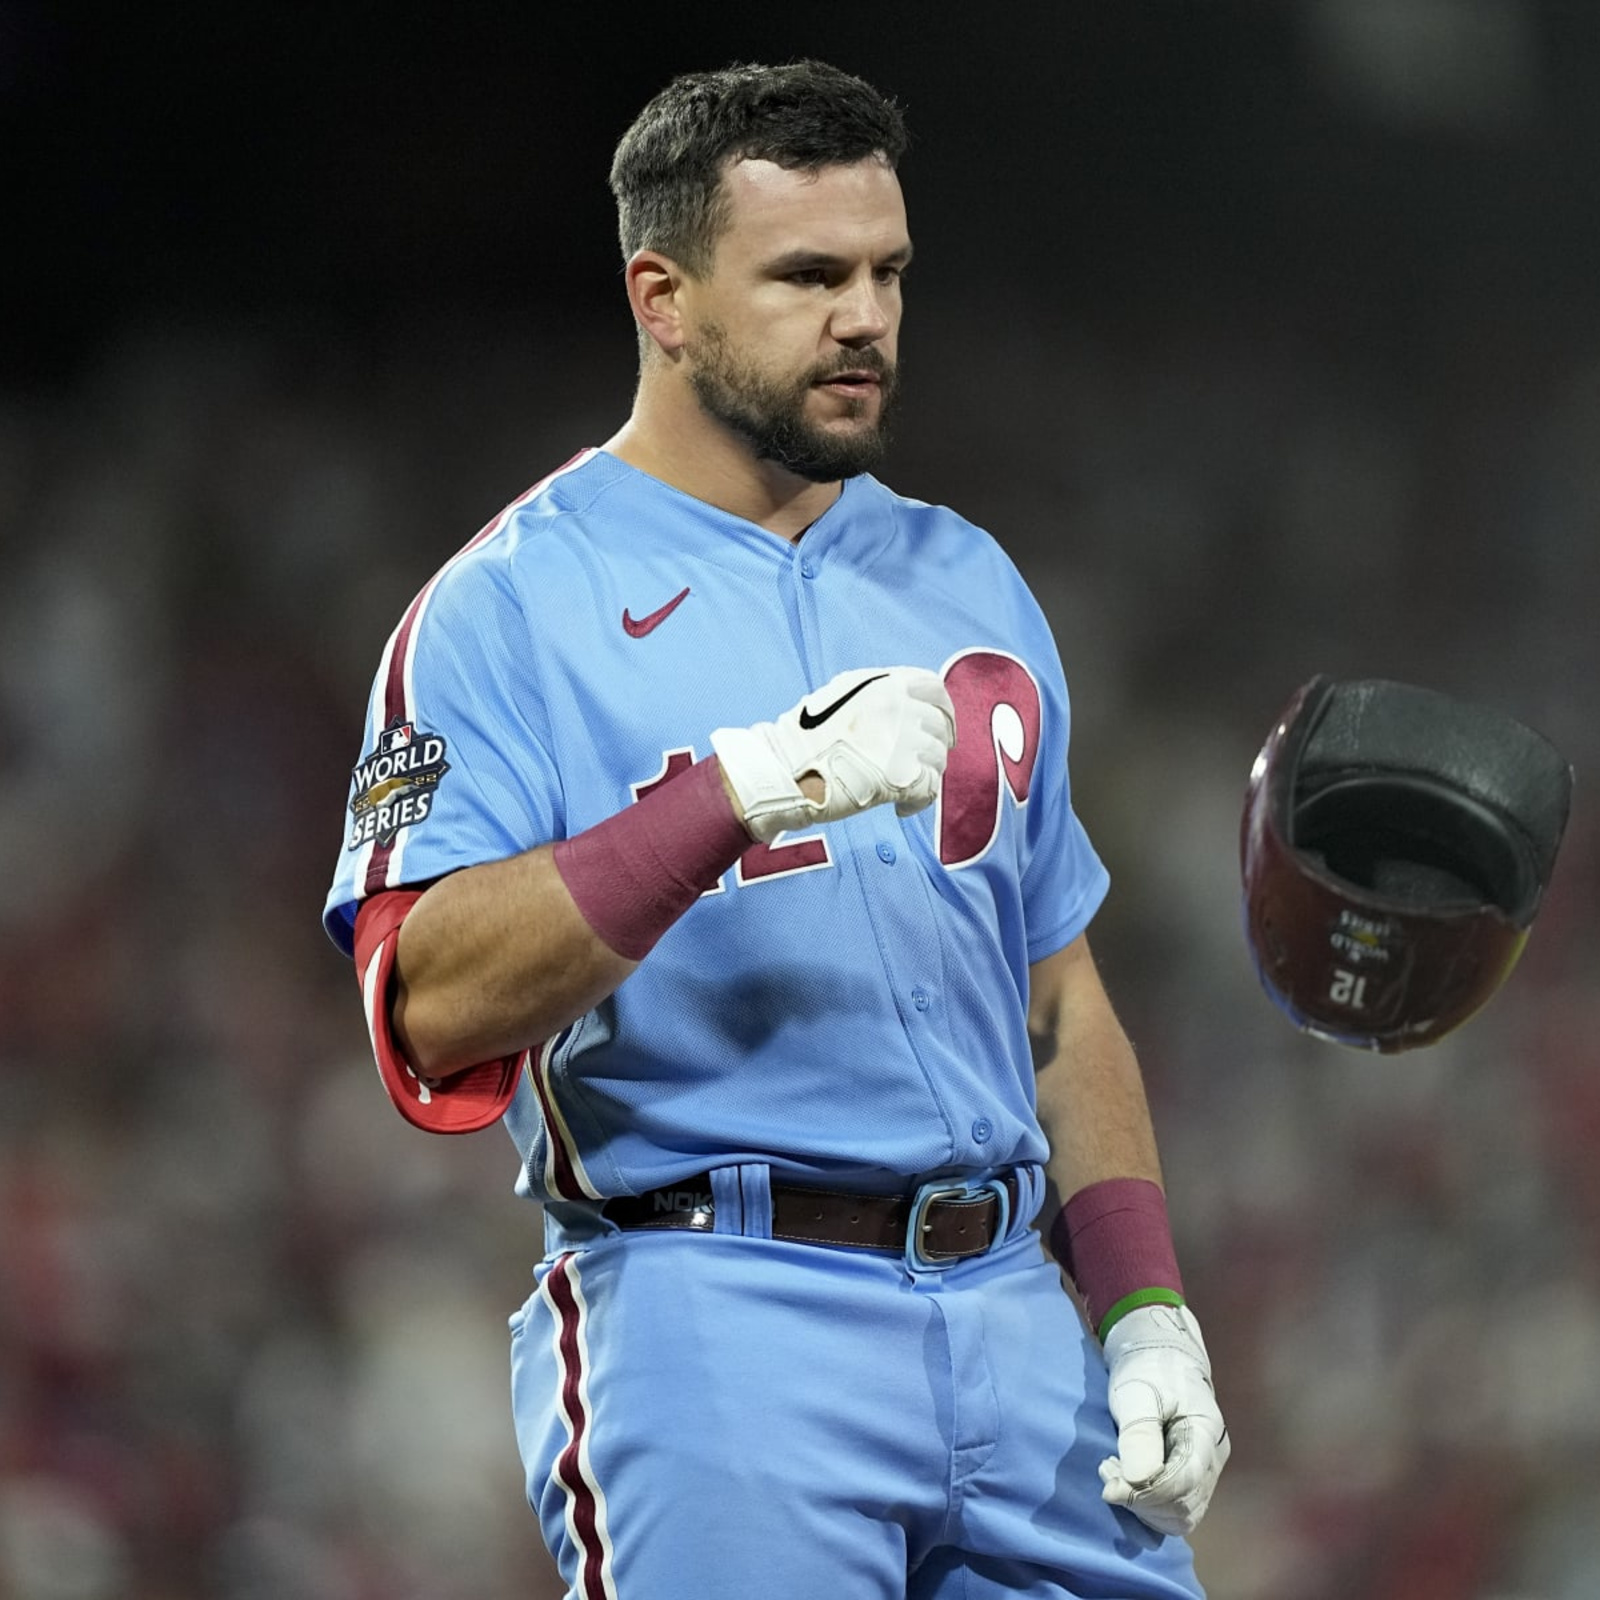 Phillies vs. Astros: World Series Game 5 score, highlights, injuries, next  game, schedule